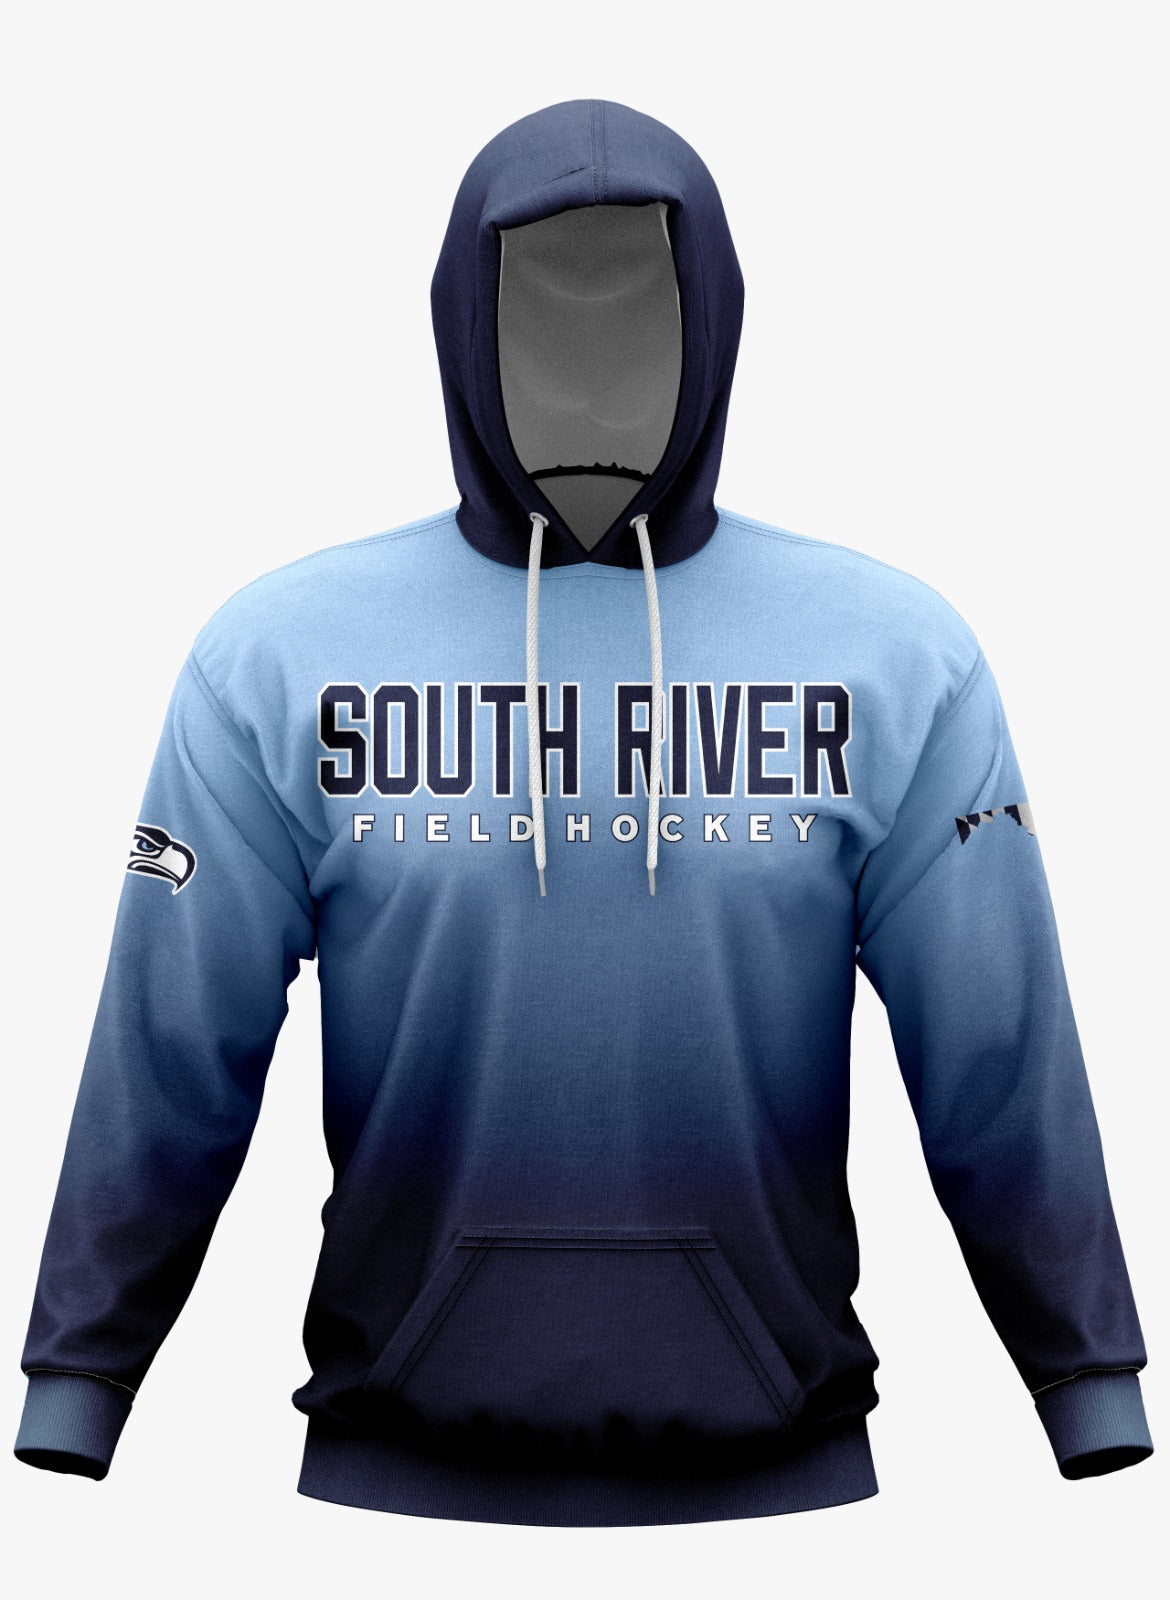 South River Field Hockey Performance Hoodie ~ Ombre Fade